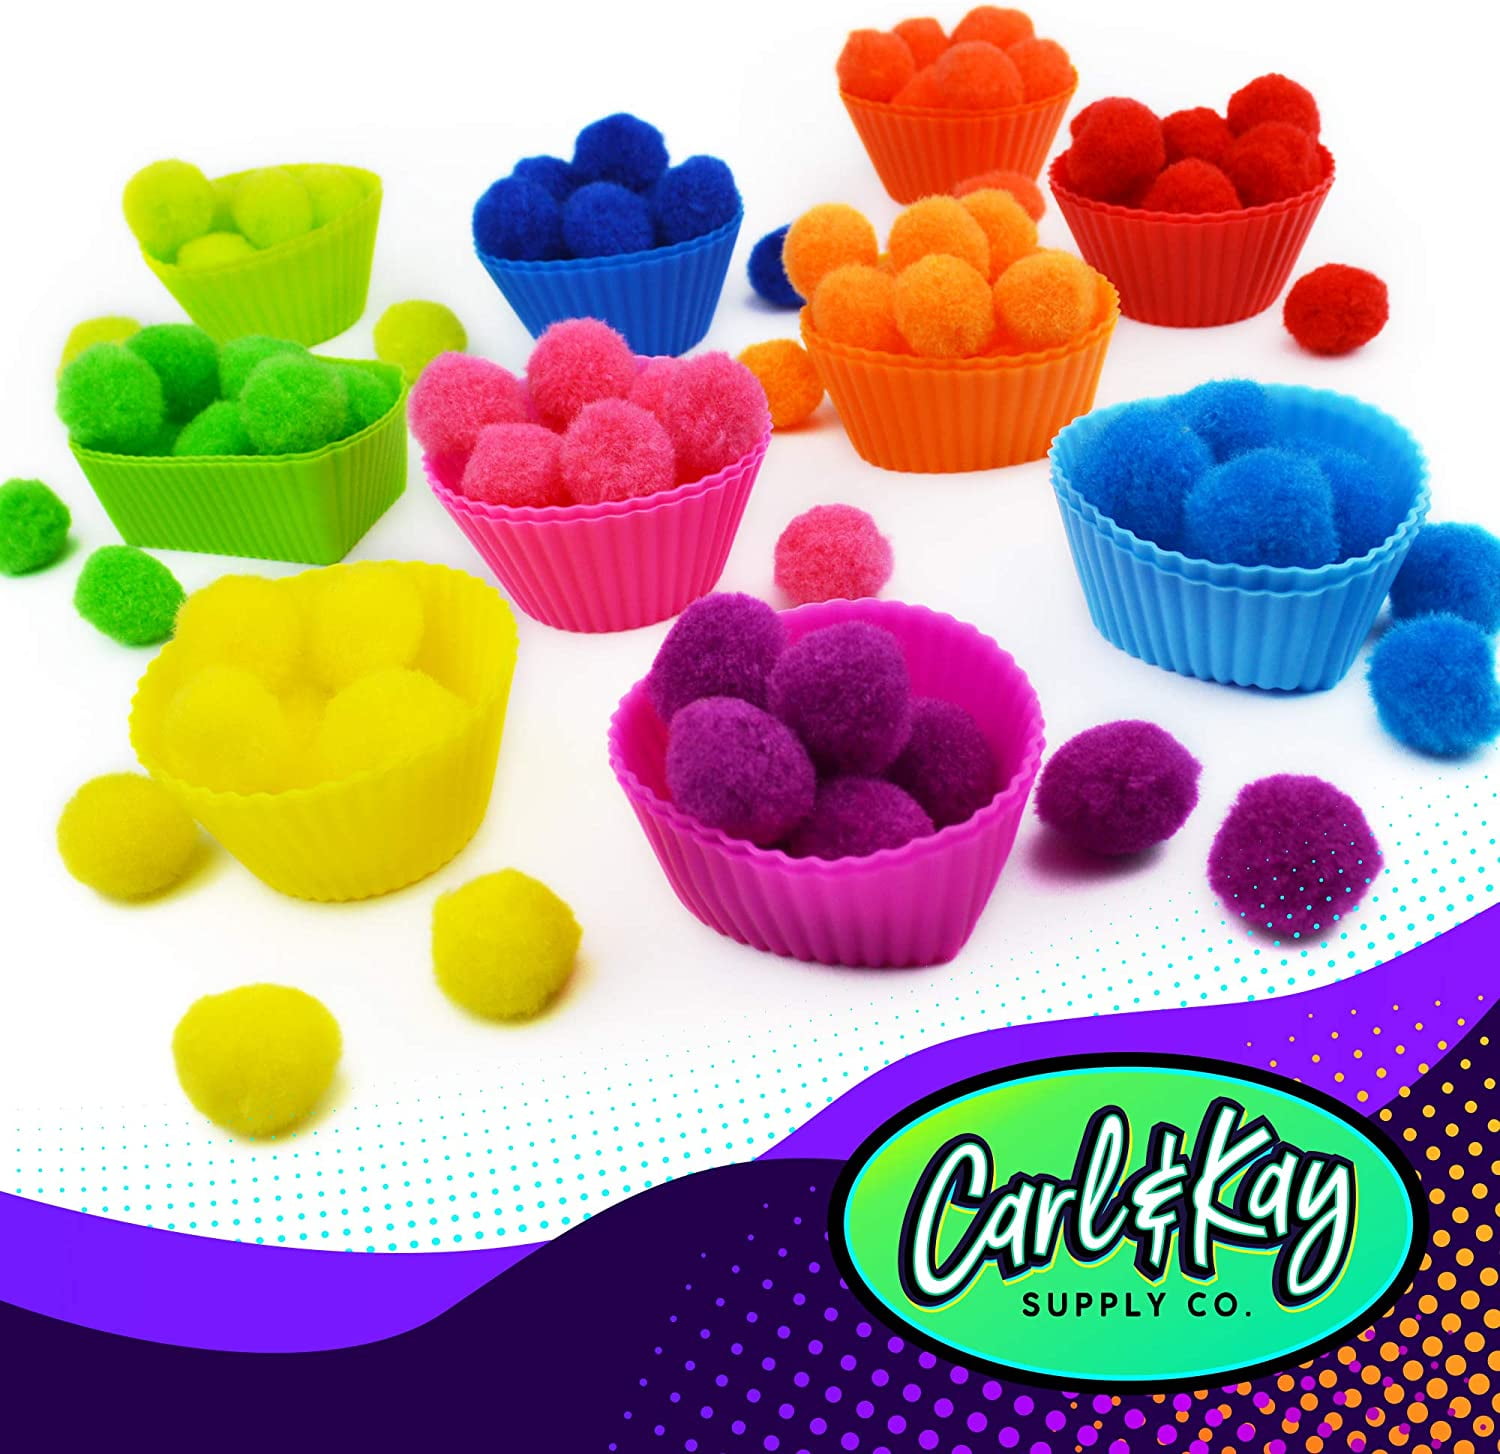 Assorted Color Pom Pom Balls at Rs 117/pack in Surat